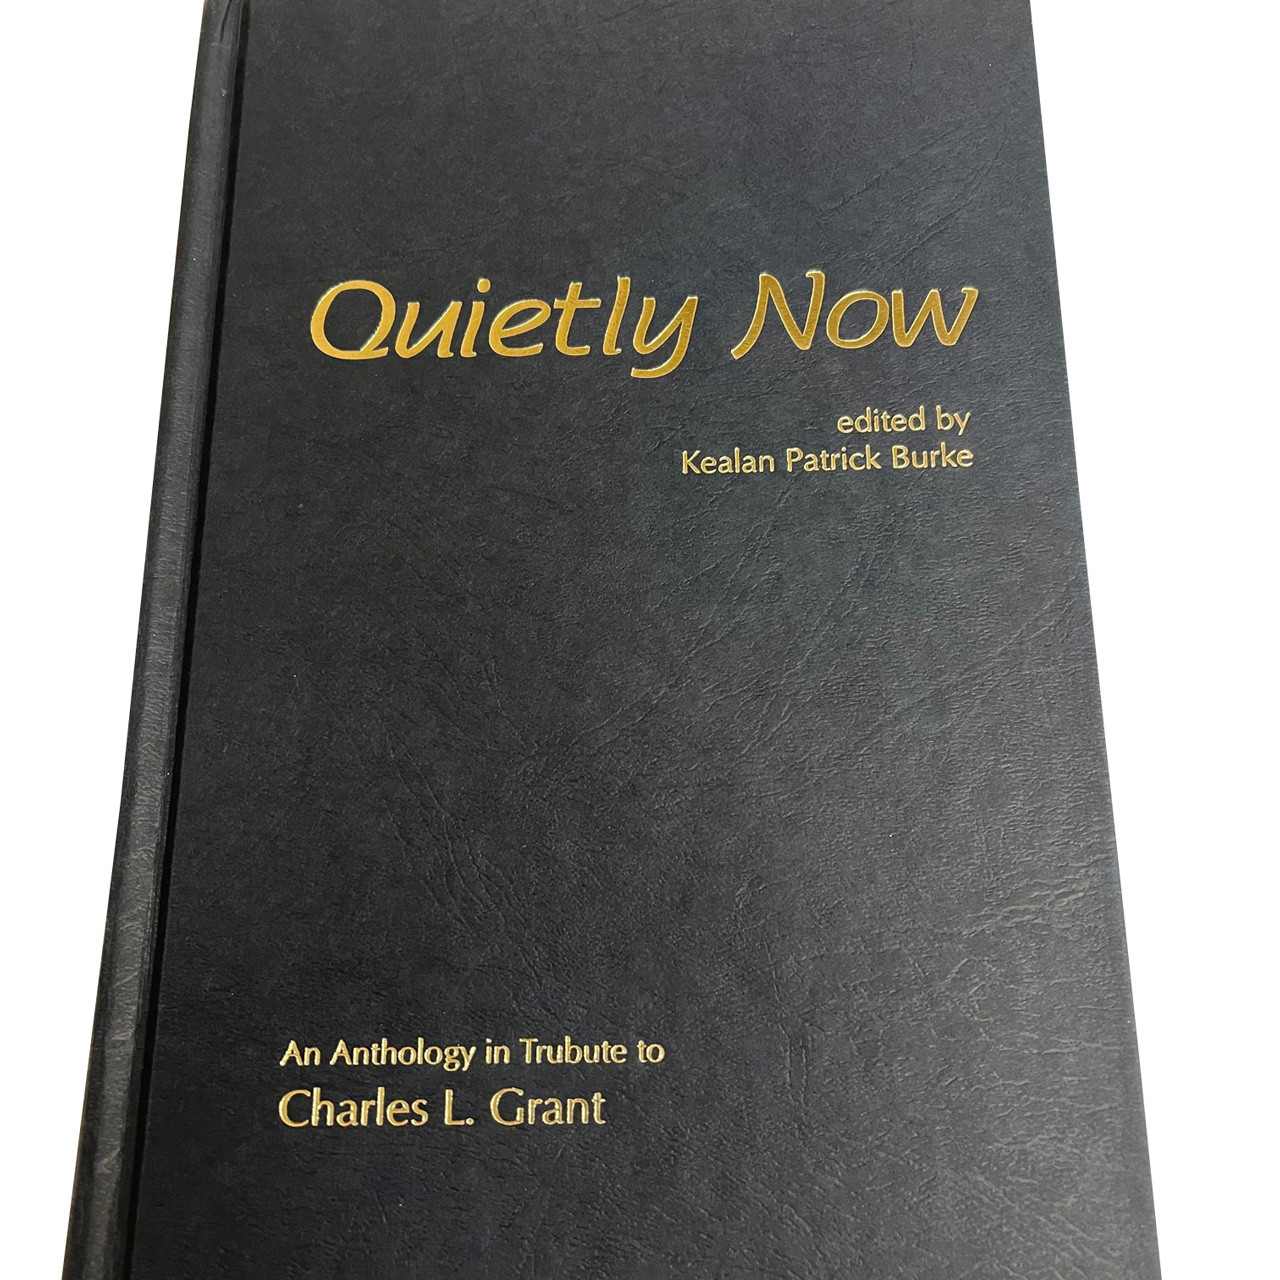 "Quietly Now: An Anthology in Tribute to Charles L. Grant" Signed Limited Edition No. 390/500